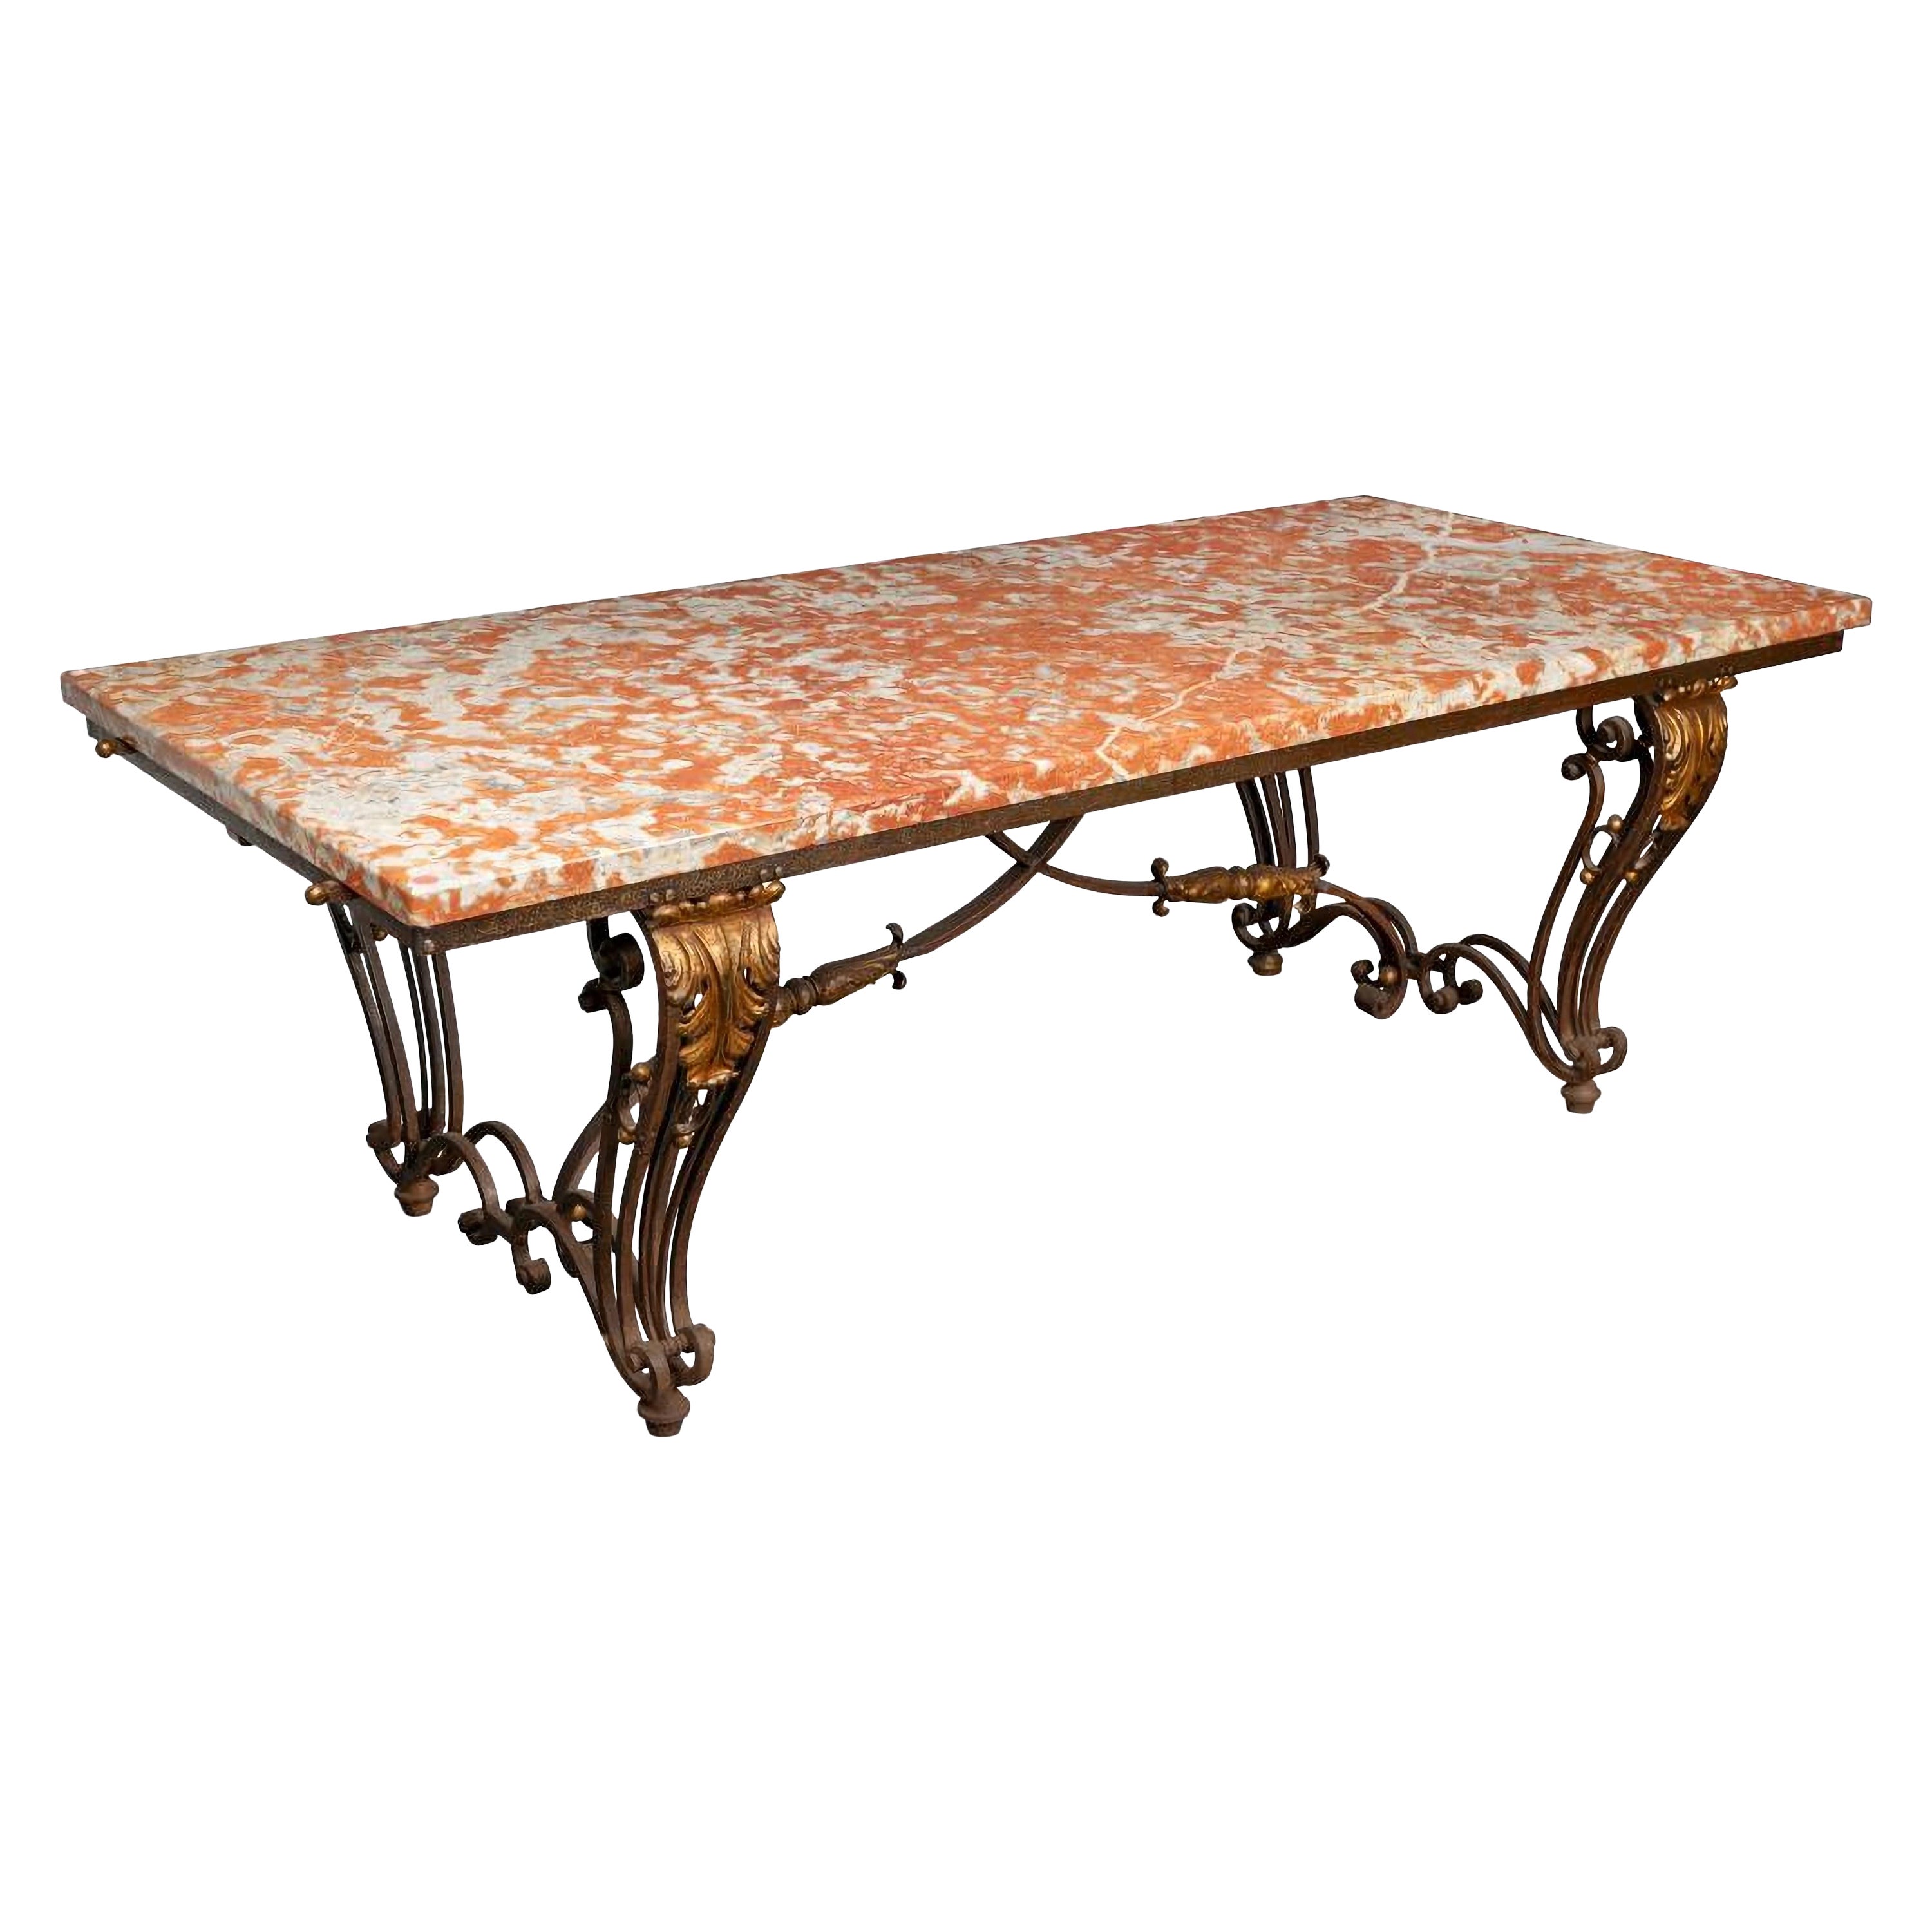 An Early 20th Century French Orange Marble-Top Table On Wrought Iron Base For Sale